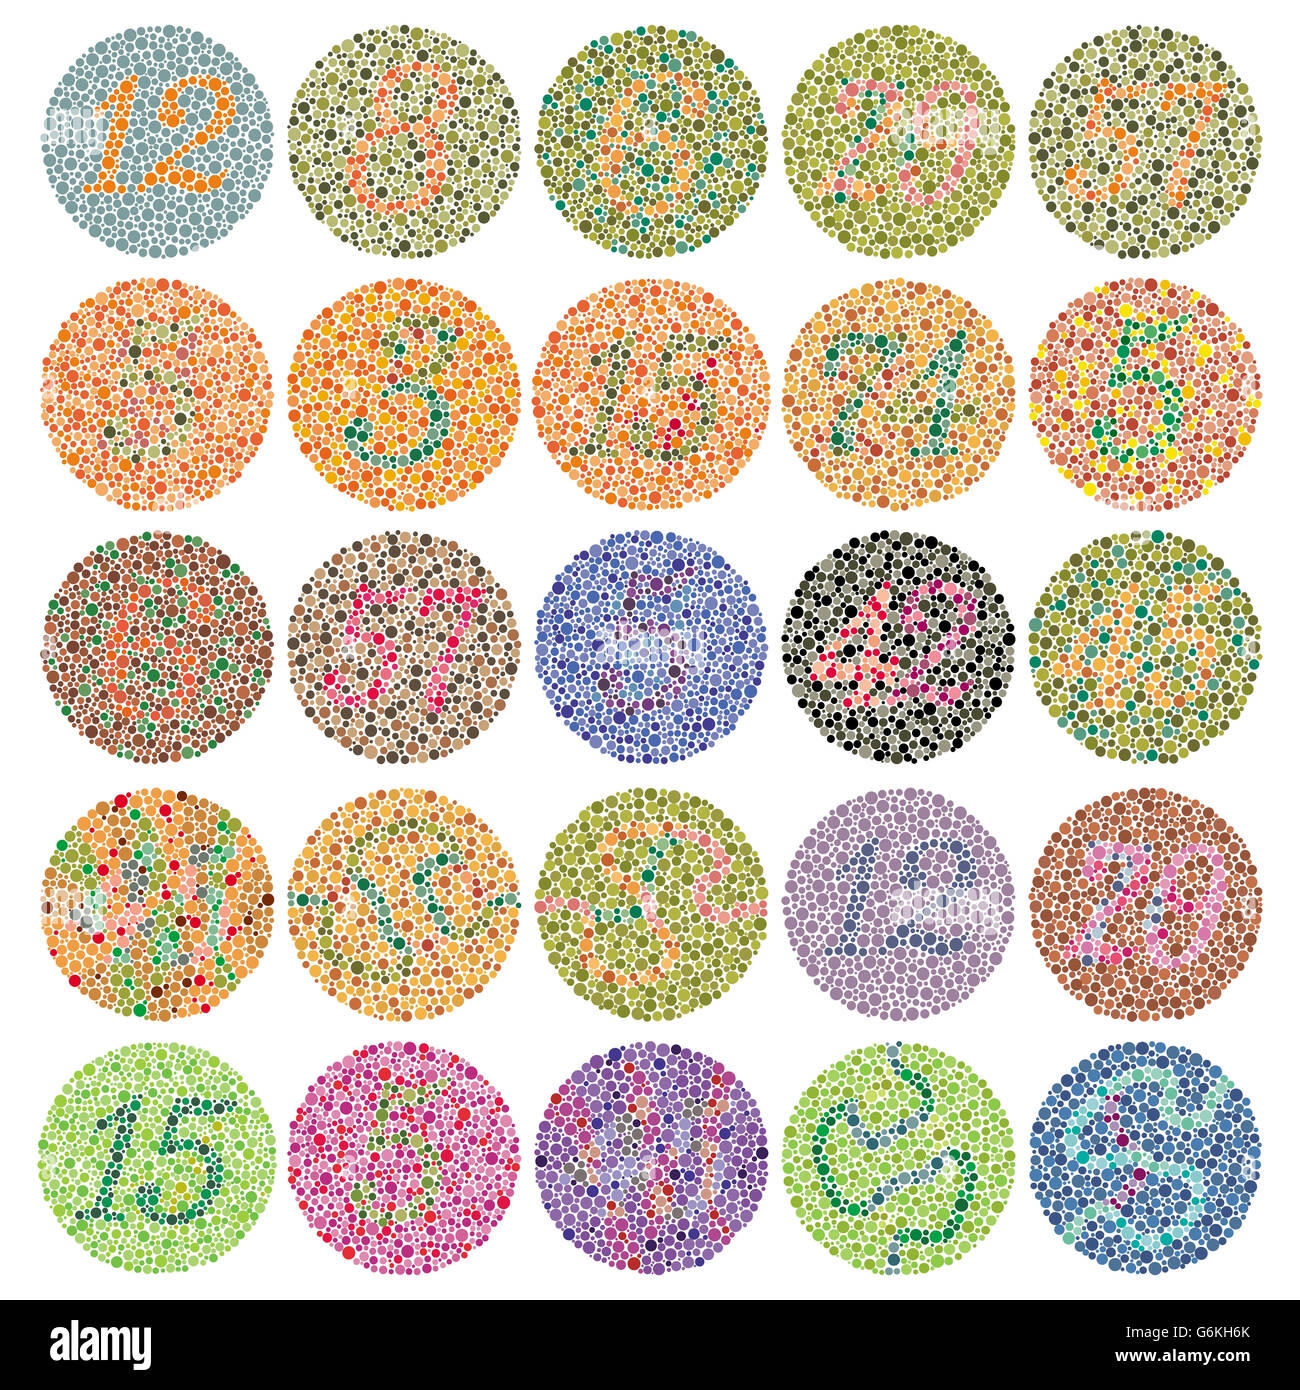 Ishihara Color Blindness Test Hi res Stock Photography And Images Alamy